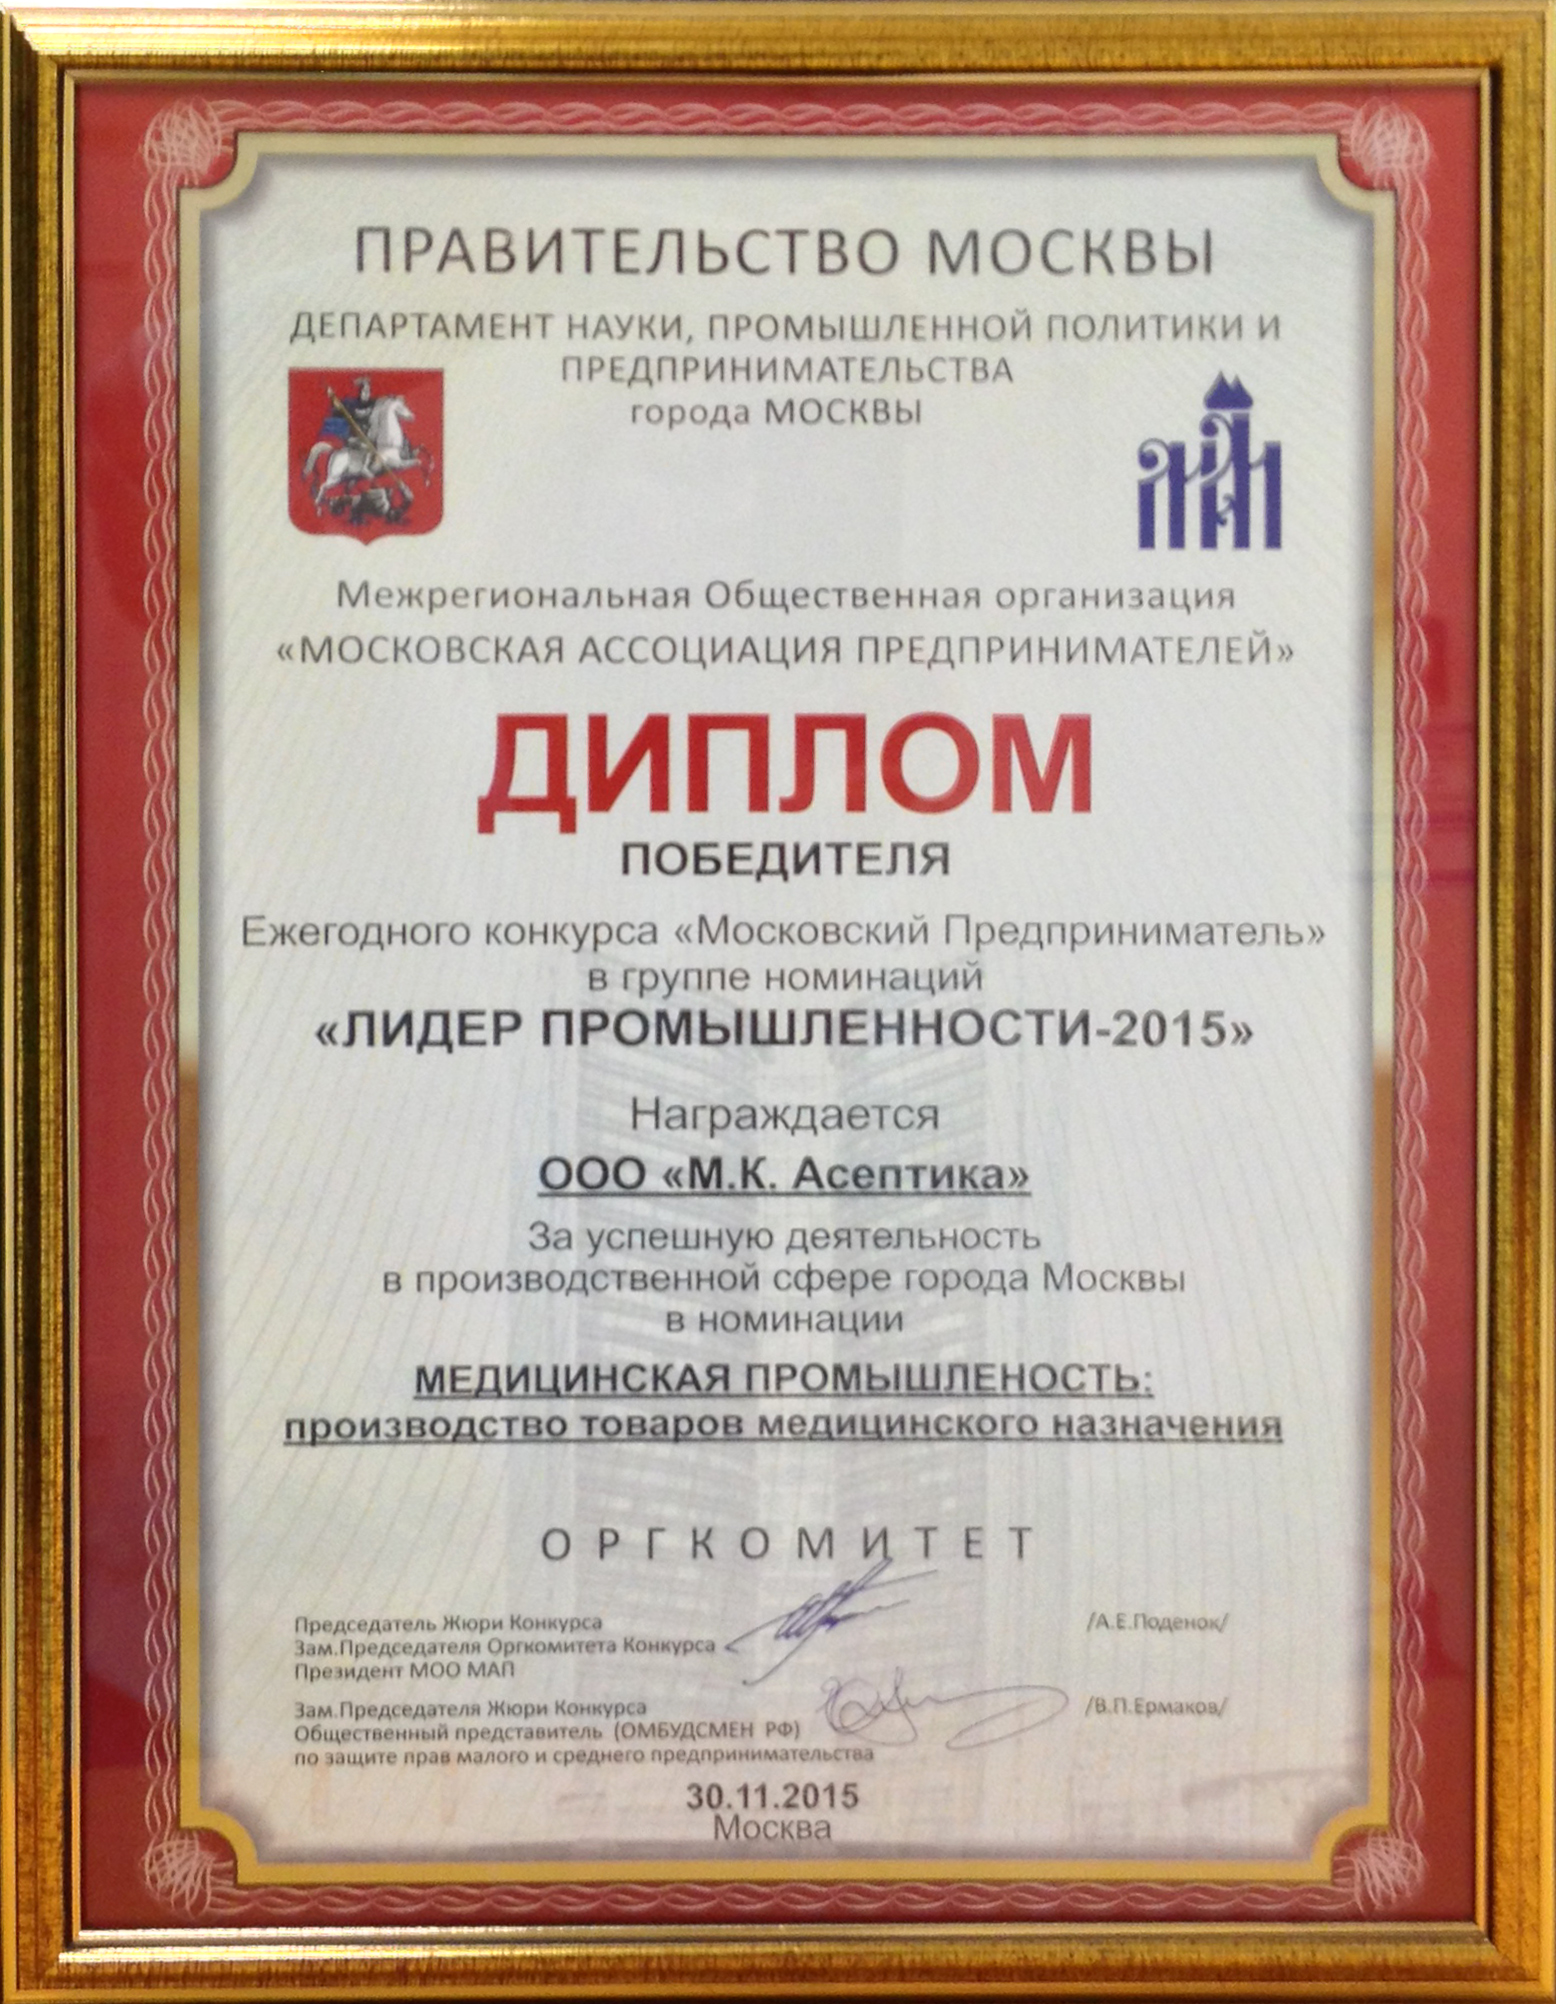 Diploma of the winner of the "Moscow Entrepreneur" annual competition in the "Industry Leader 2015" group of nominations